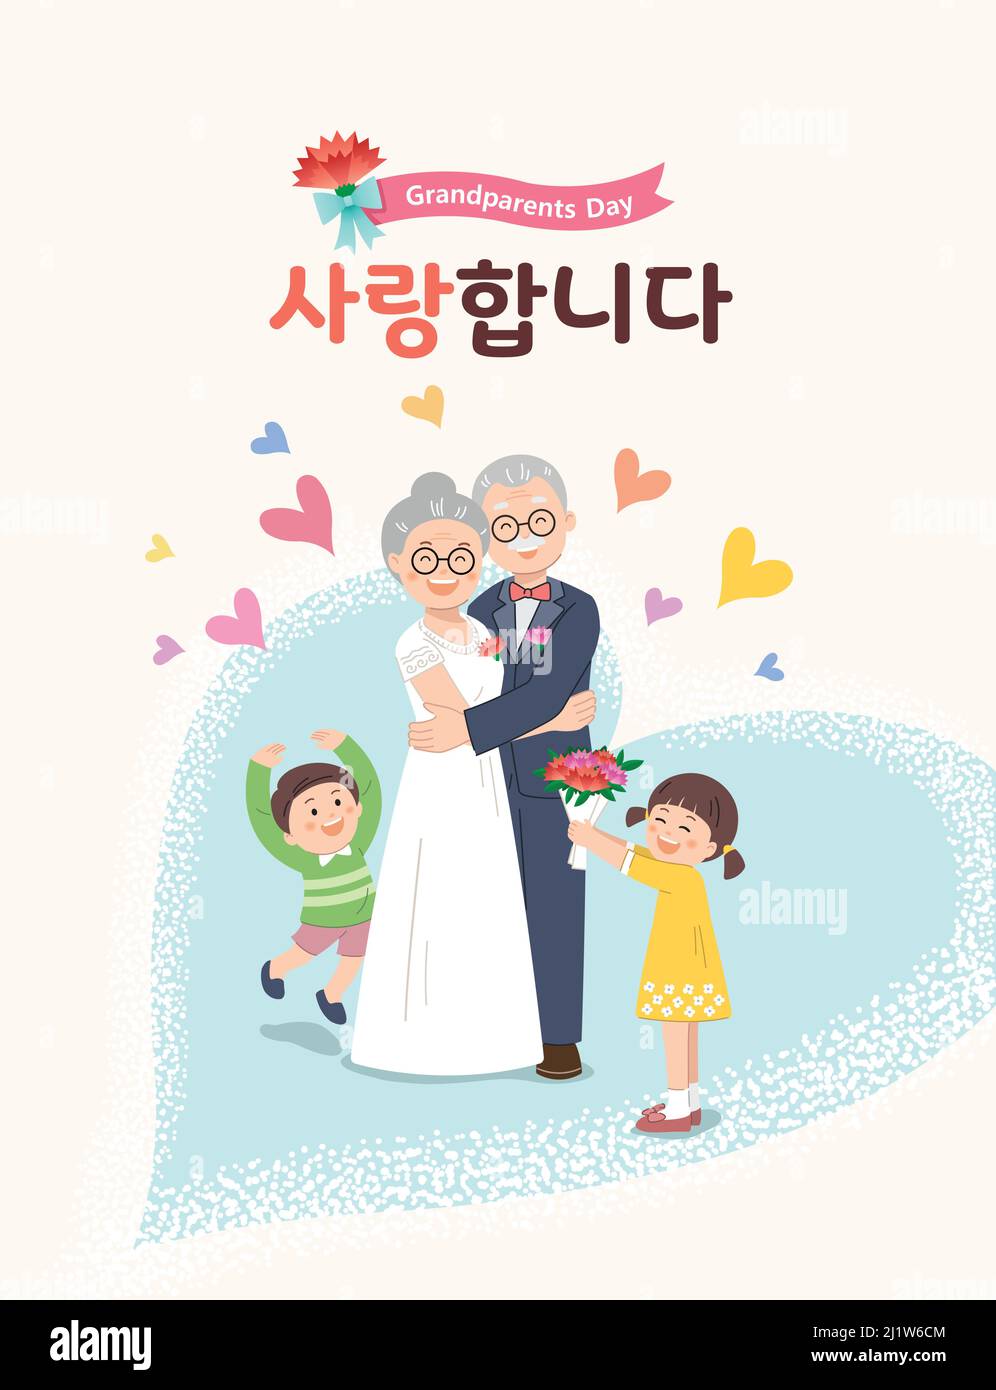 Grandparents day, happy family. Grandfather and grandmother are congratulated by their grandchildren. I love you, Korean translation. Stock Vector